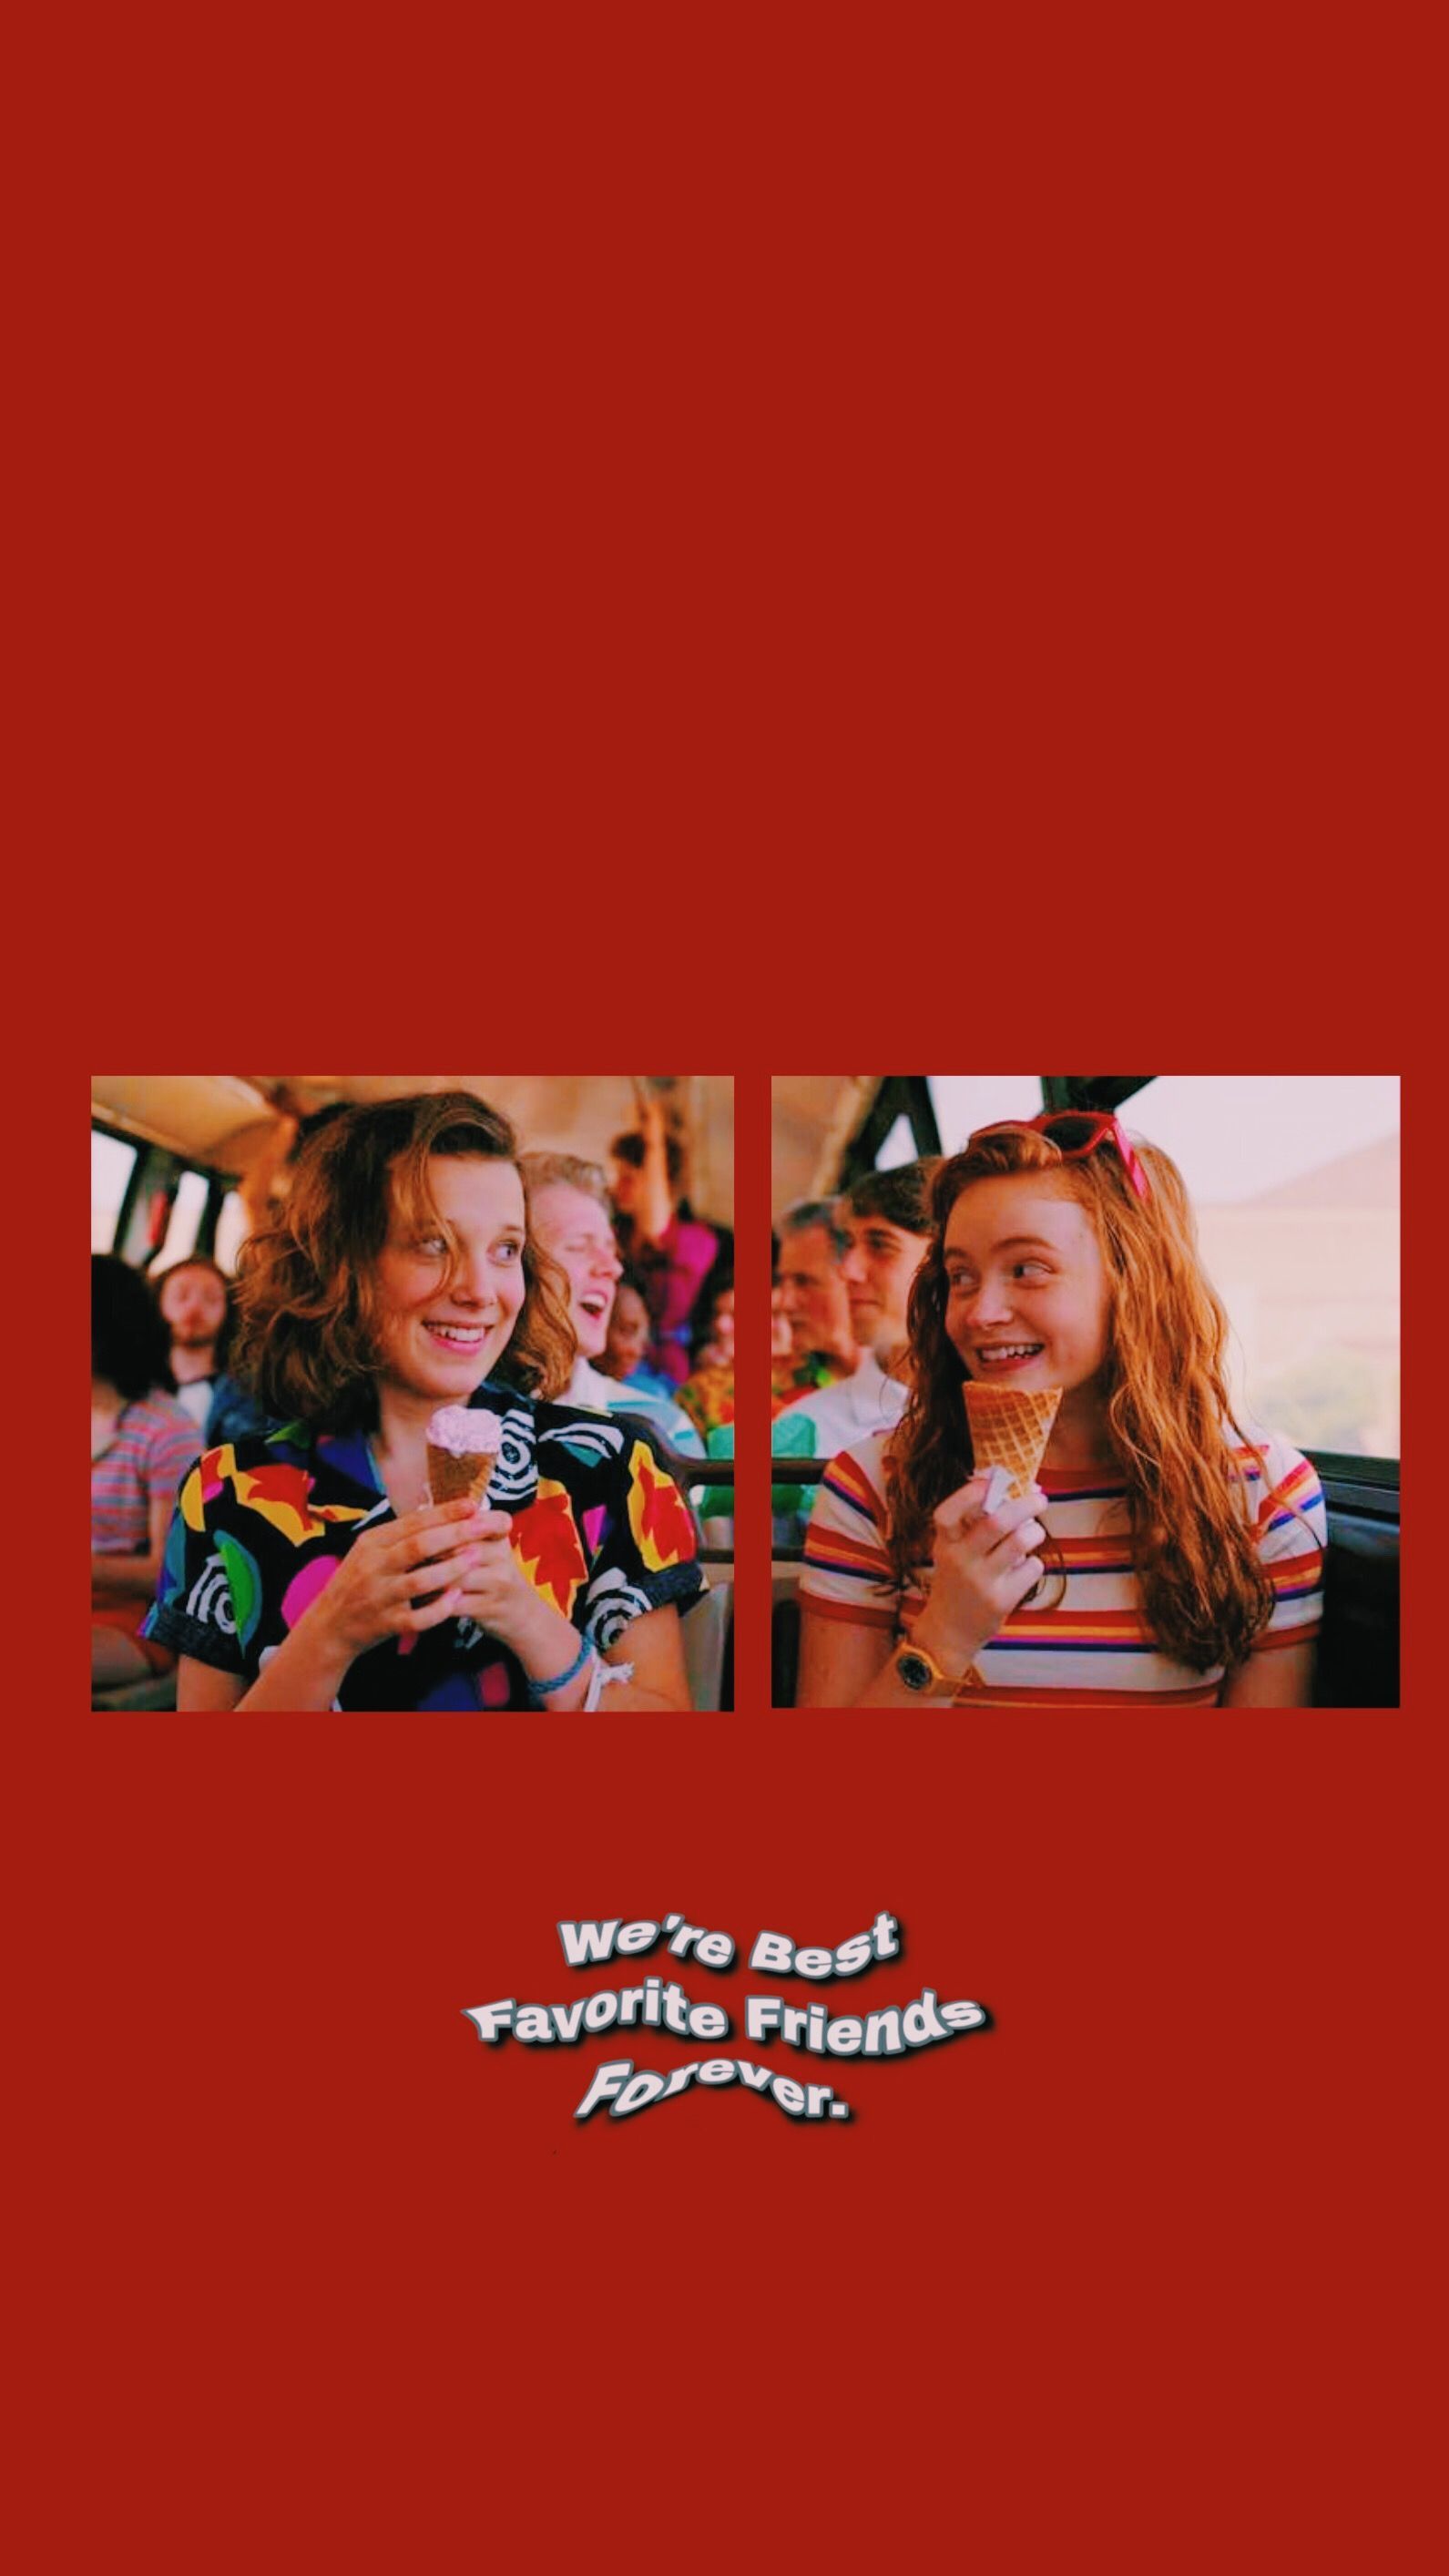 Max Mayfield and Eleven Hopper Wallpaper • Instagram photo and vide. Stranger things wallpaper, Stranger things quote, Stranger things actors